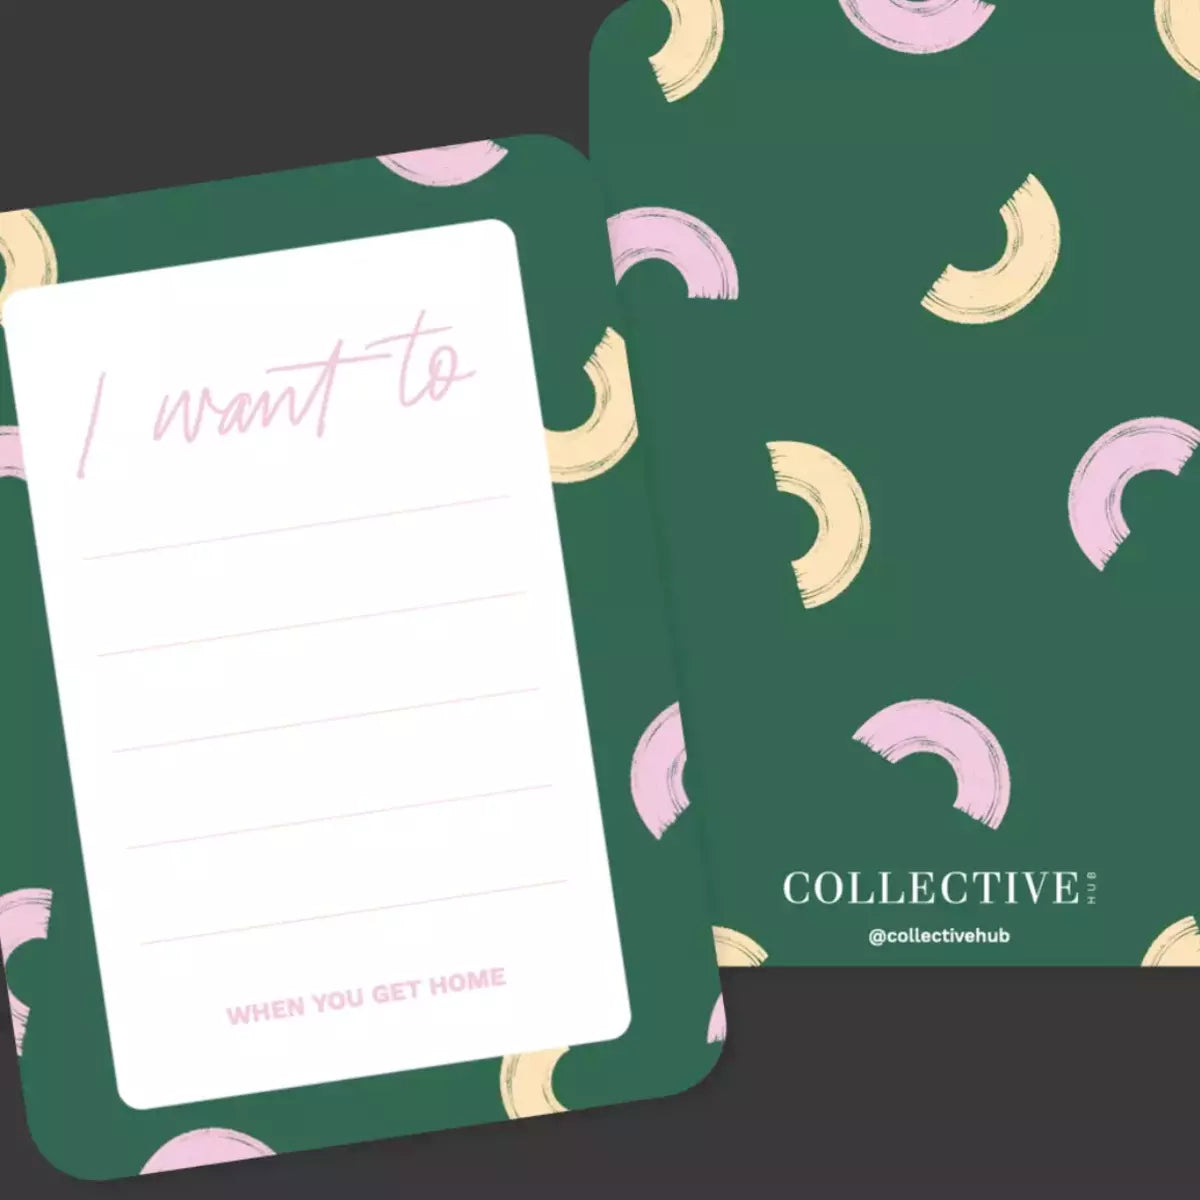 I want to brighten the moment of delight with Collective Hub's Kindness Cards.